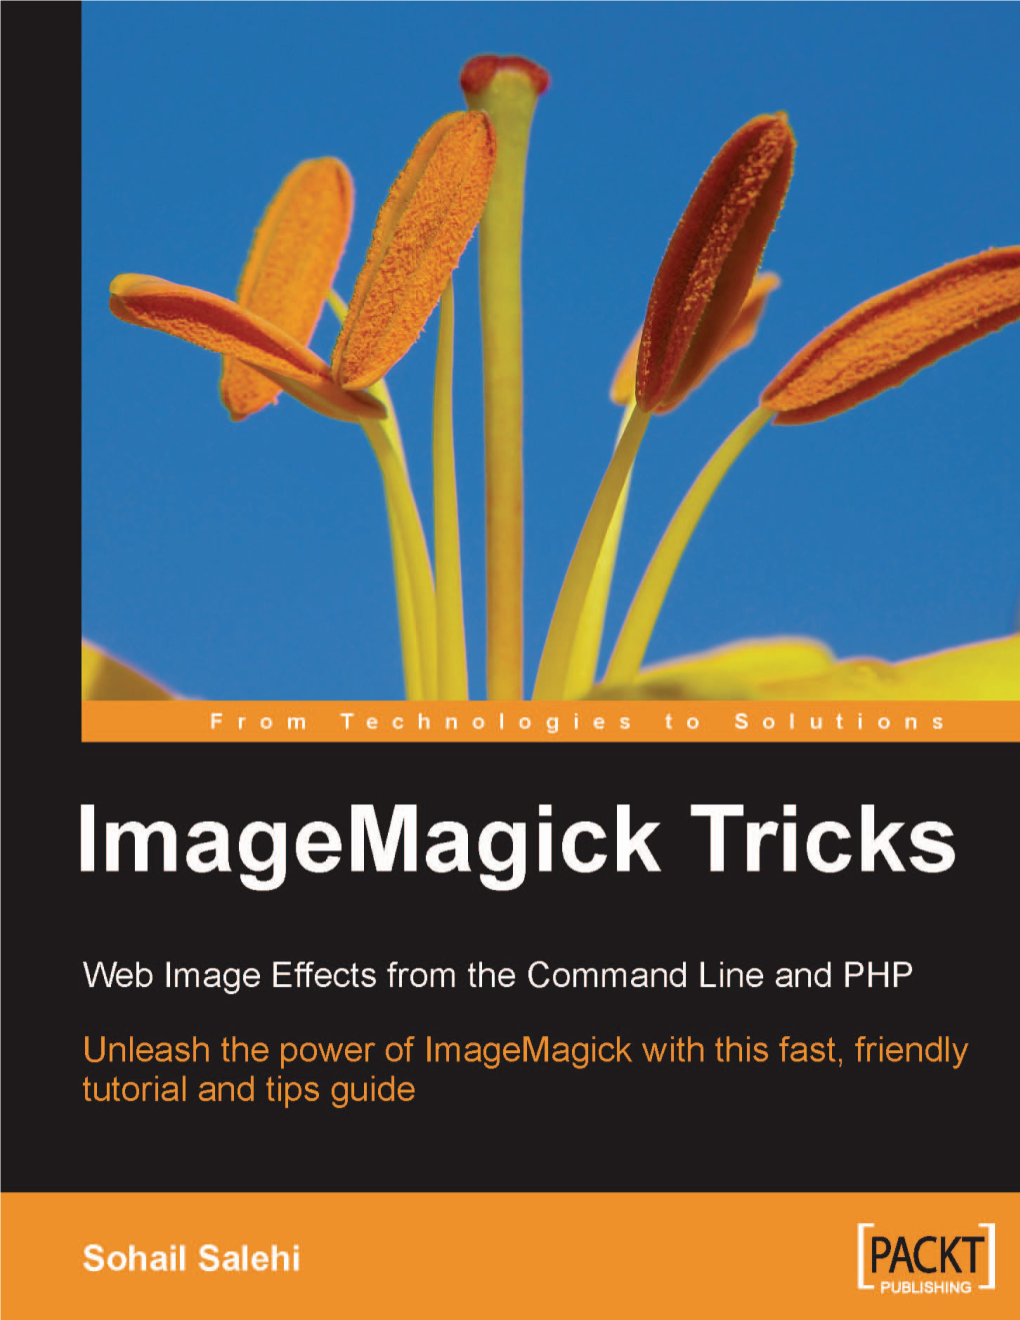 Imagemagick Tricks Web Image Effects from the Command Line and PHP